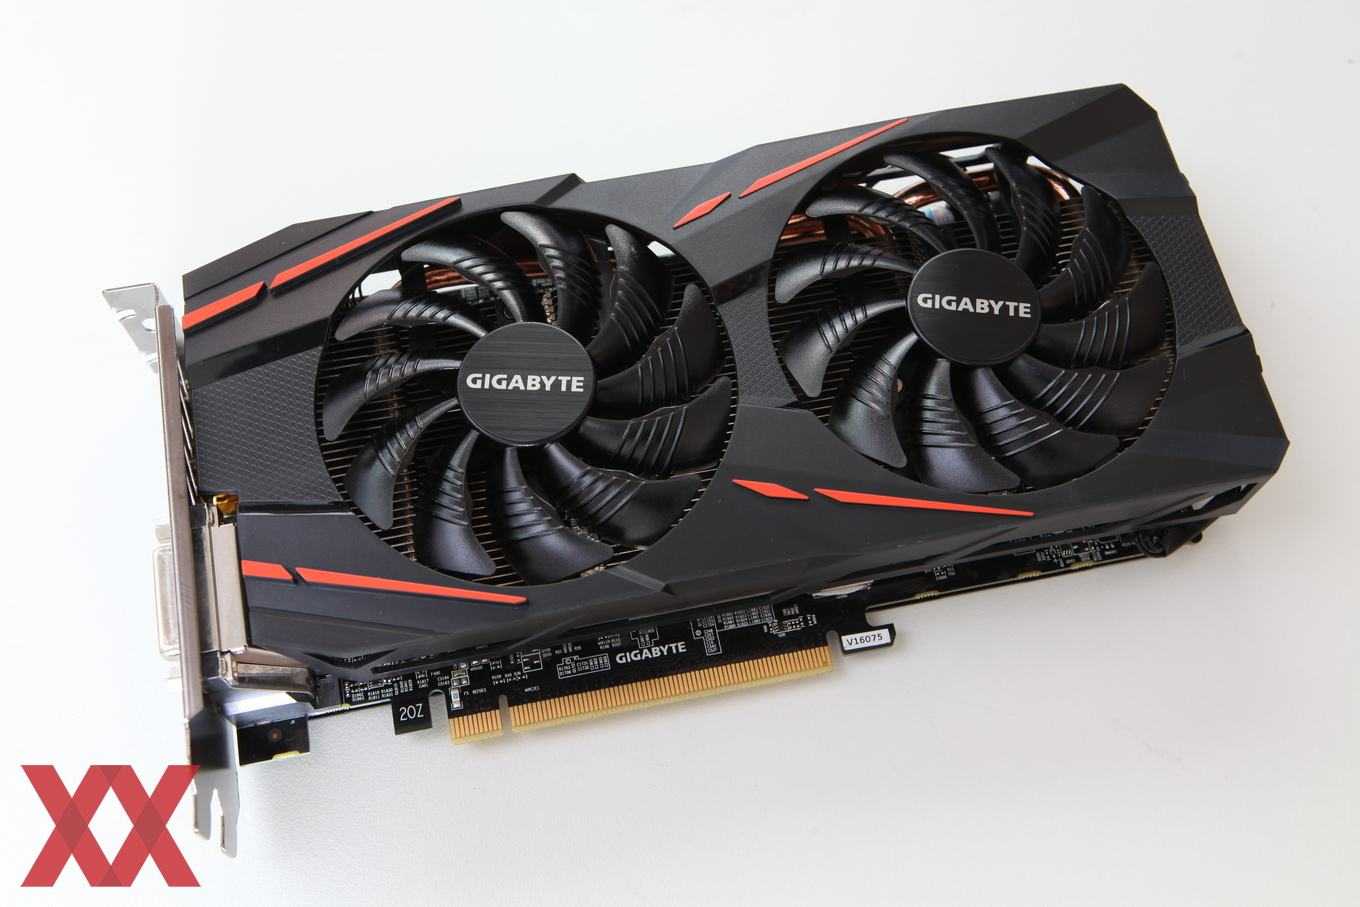 Gigabyte radeon rx 470 g1 gaming 4g review | pcmag